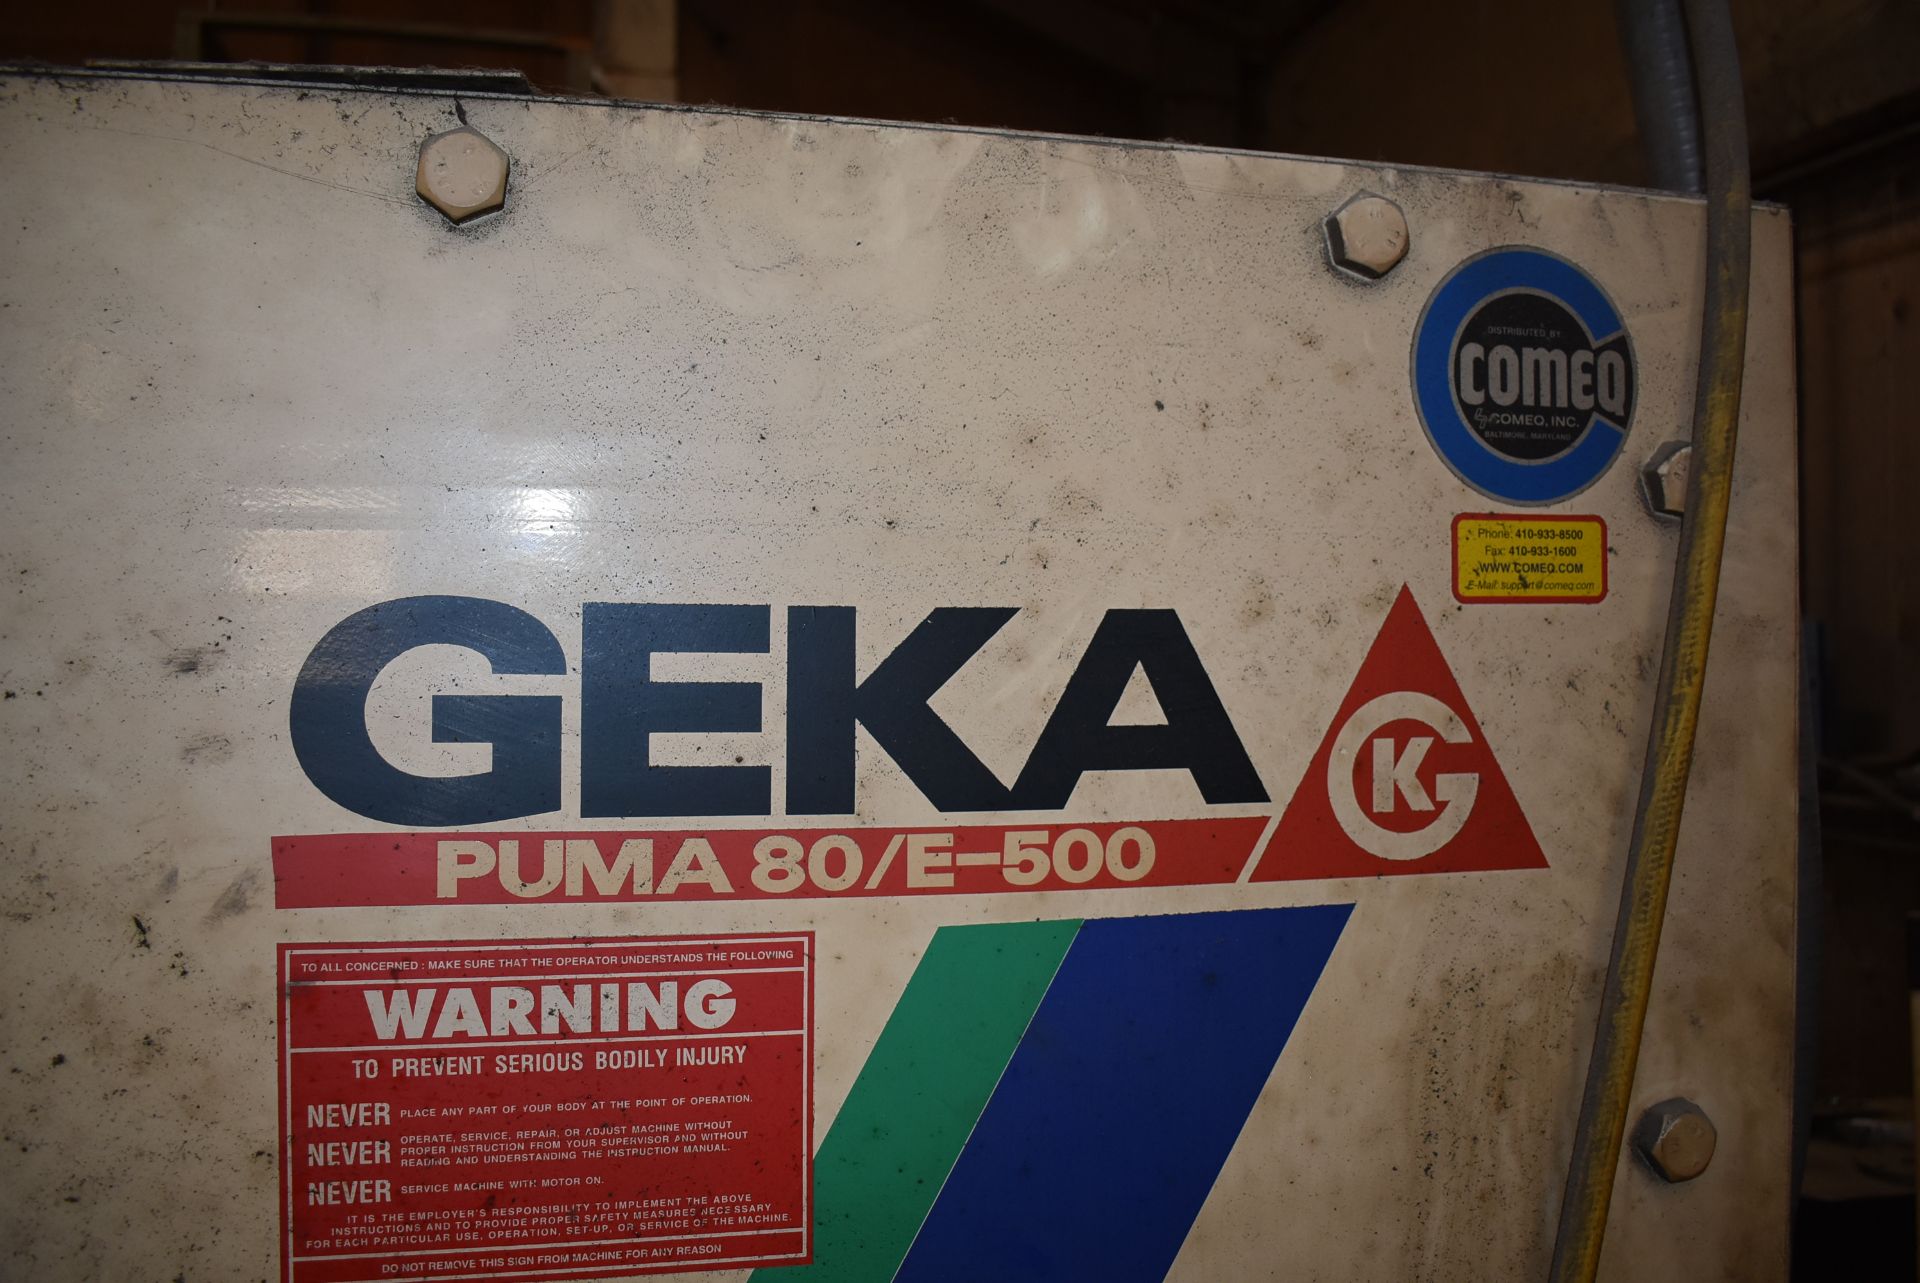 Geka Puma 80/E-500 Iron Worker w/CNC Controller, Assorted Punches & Dies - Image 2 of 6